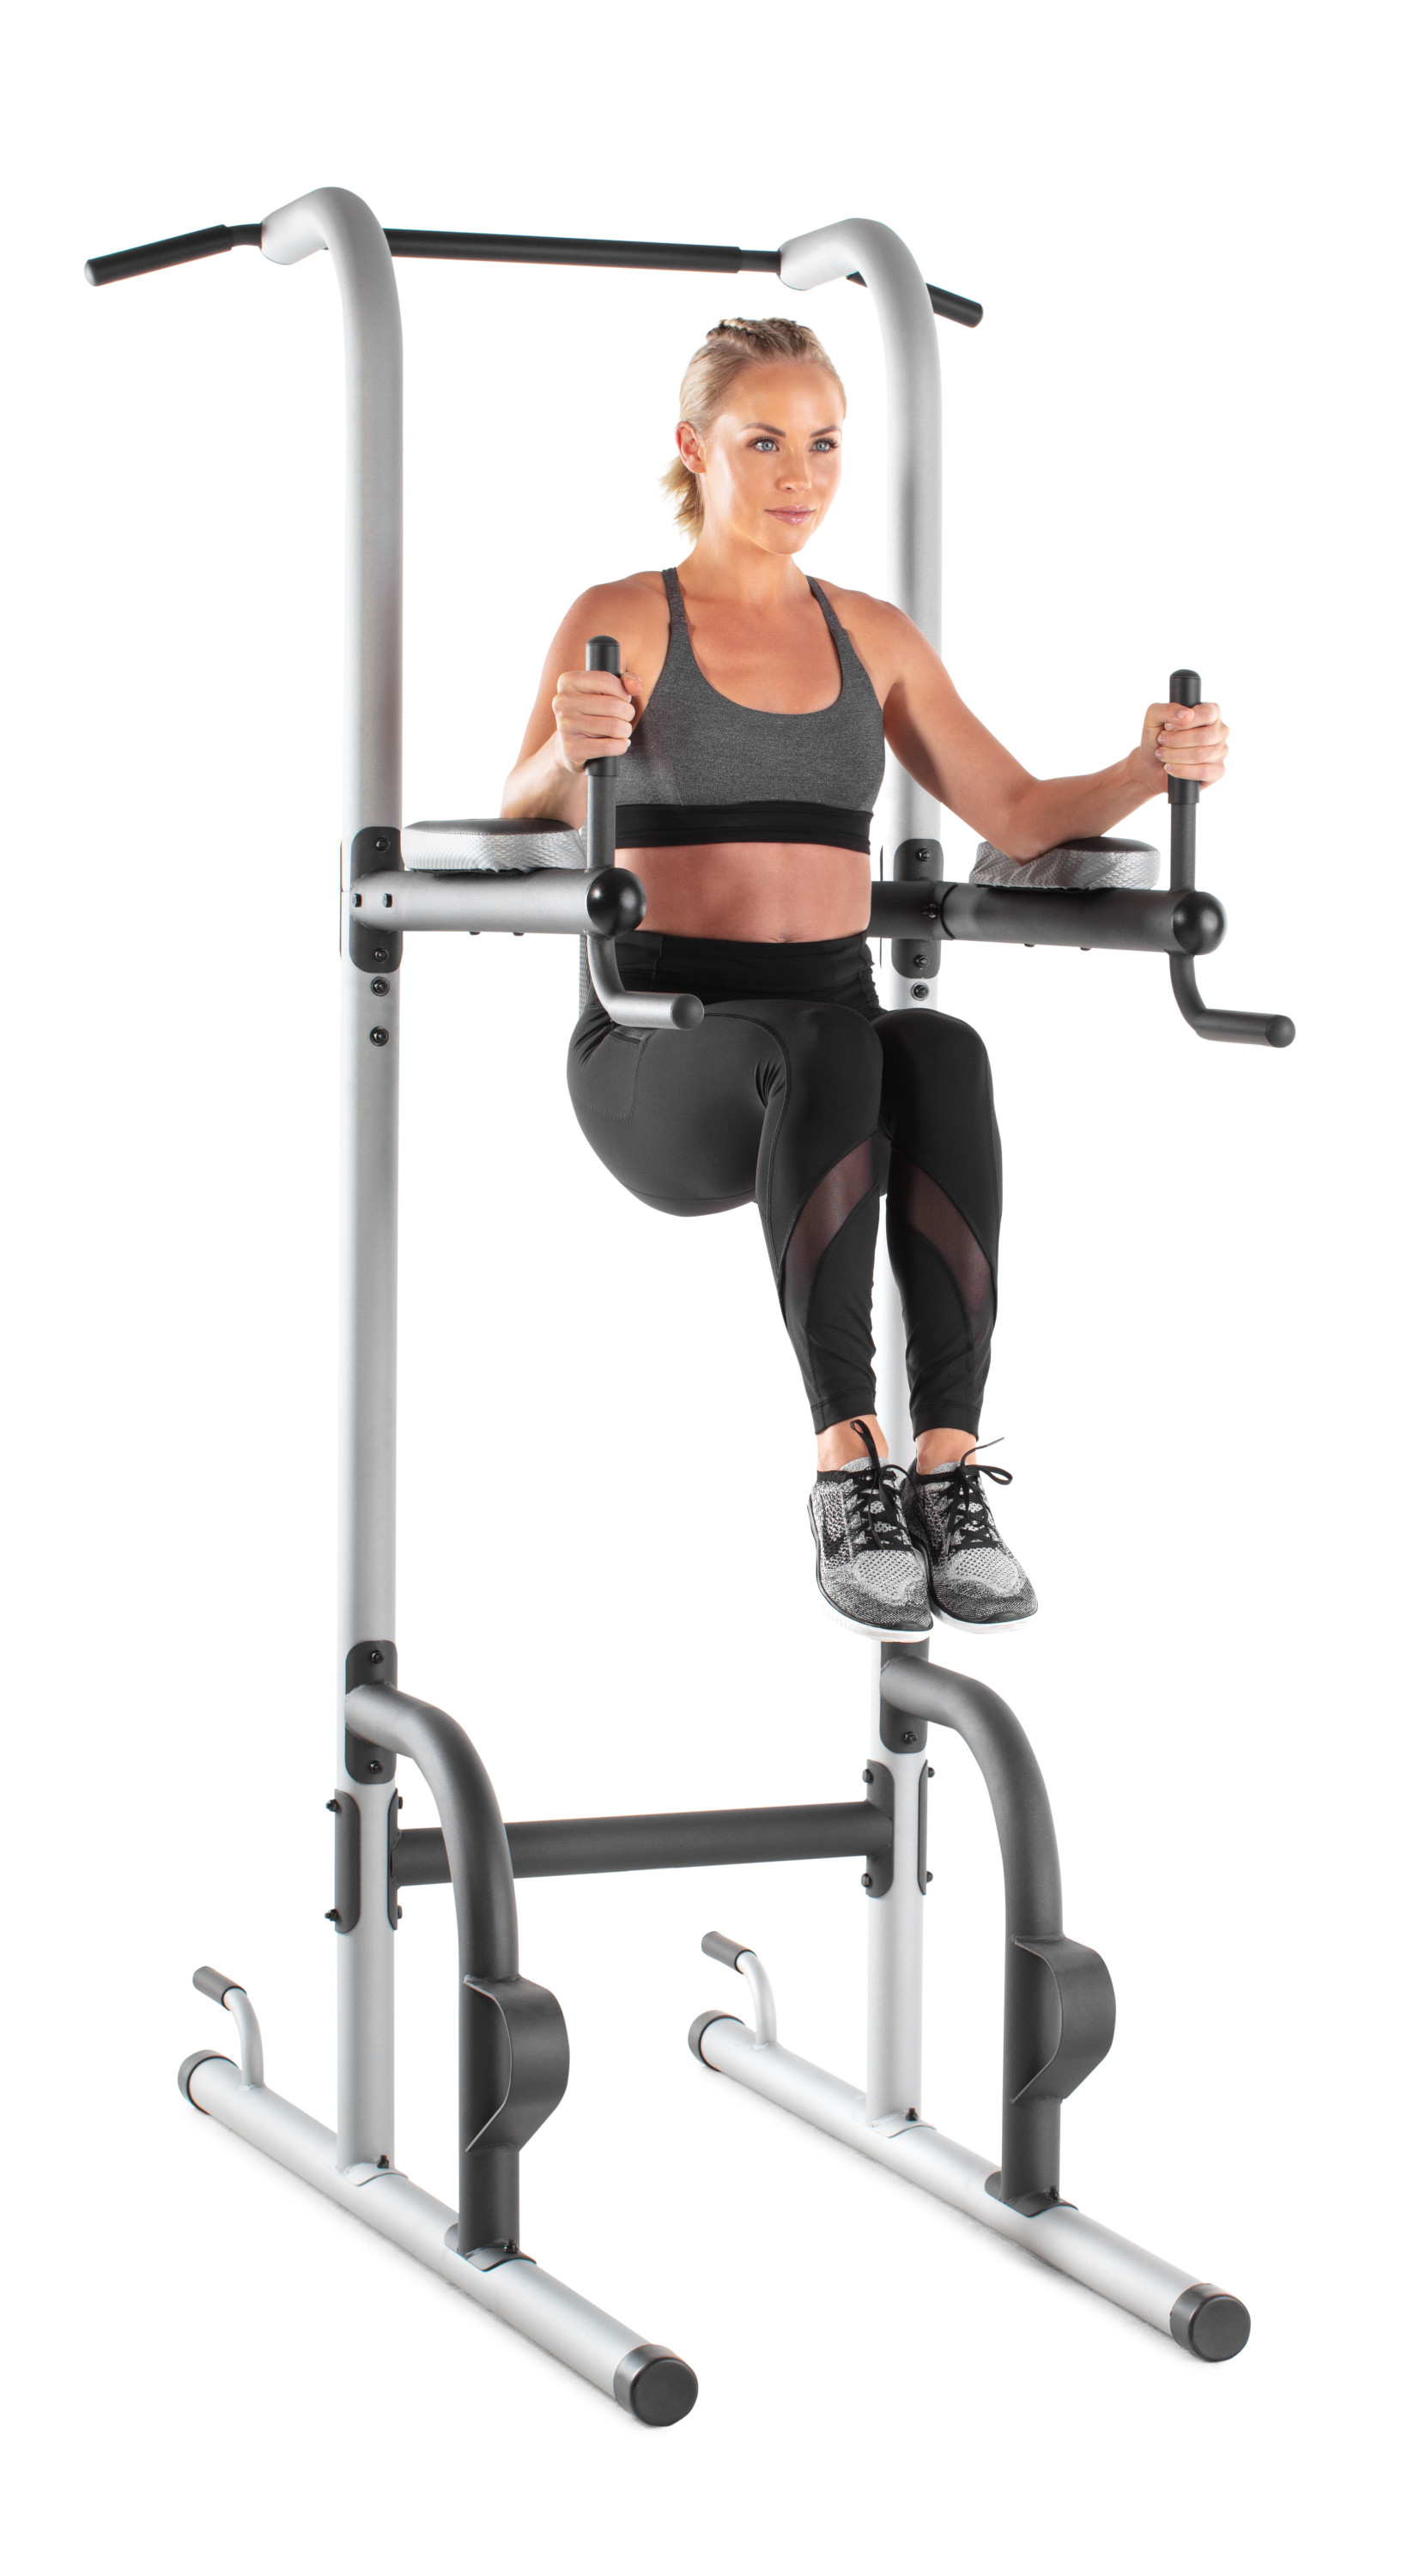 ProForm XR 10.9 Power Tower with Push-Up, Pull-Up & Dip Stations, 300 Lb. Weight Limit - image 5 of 9